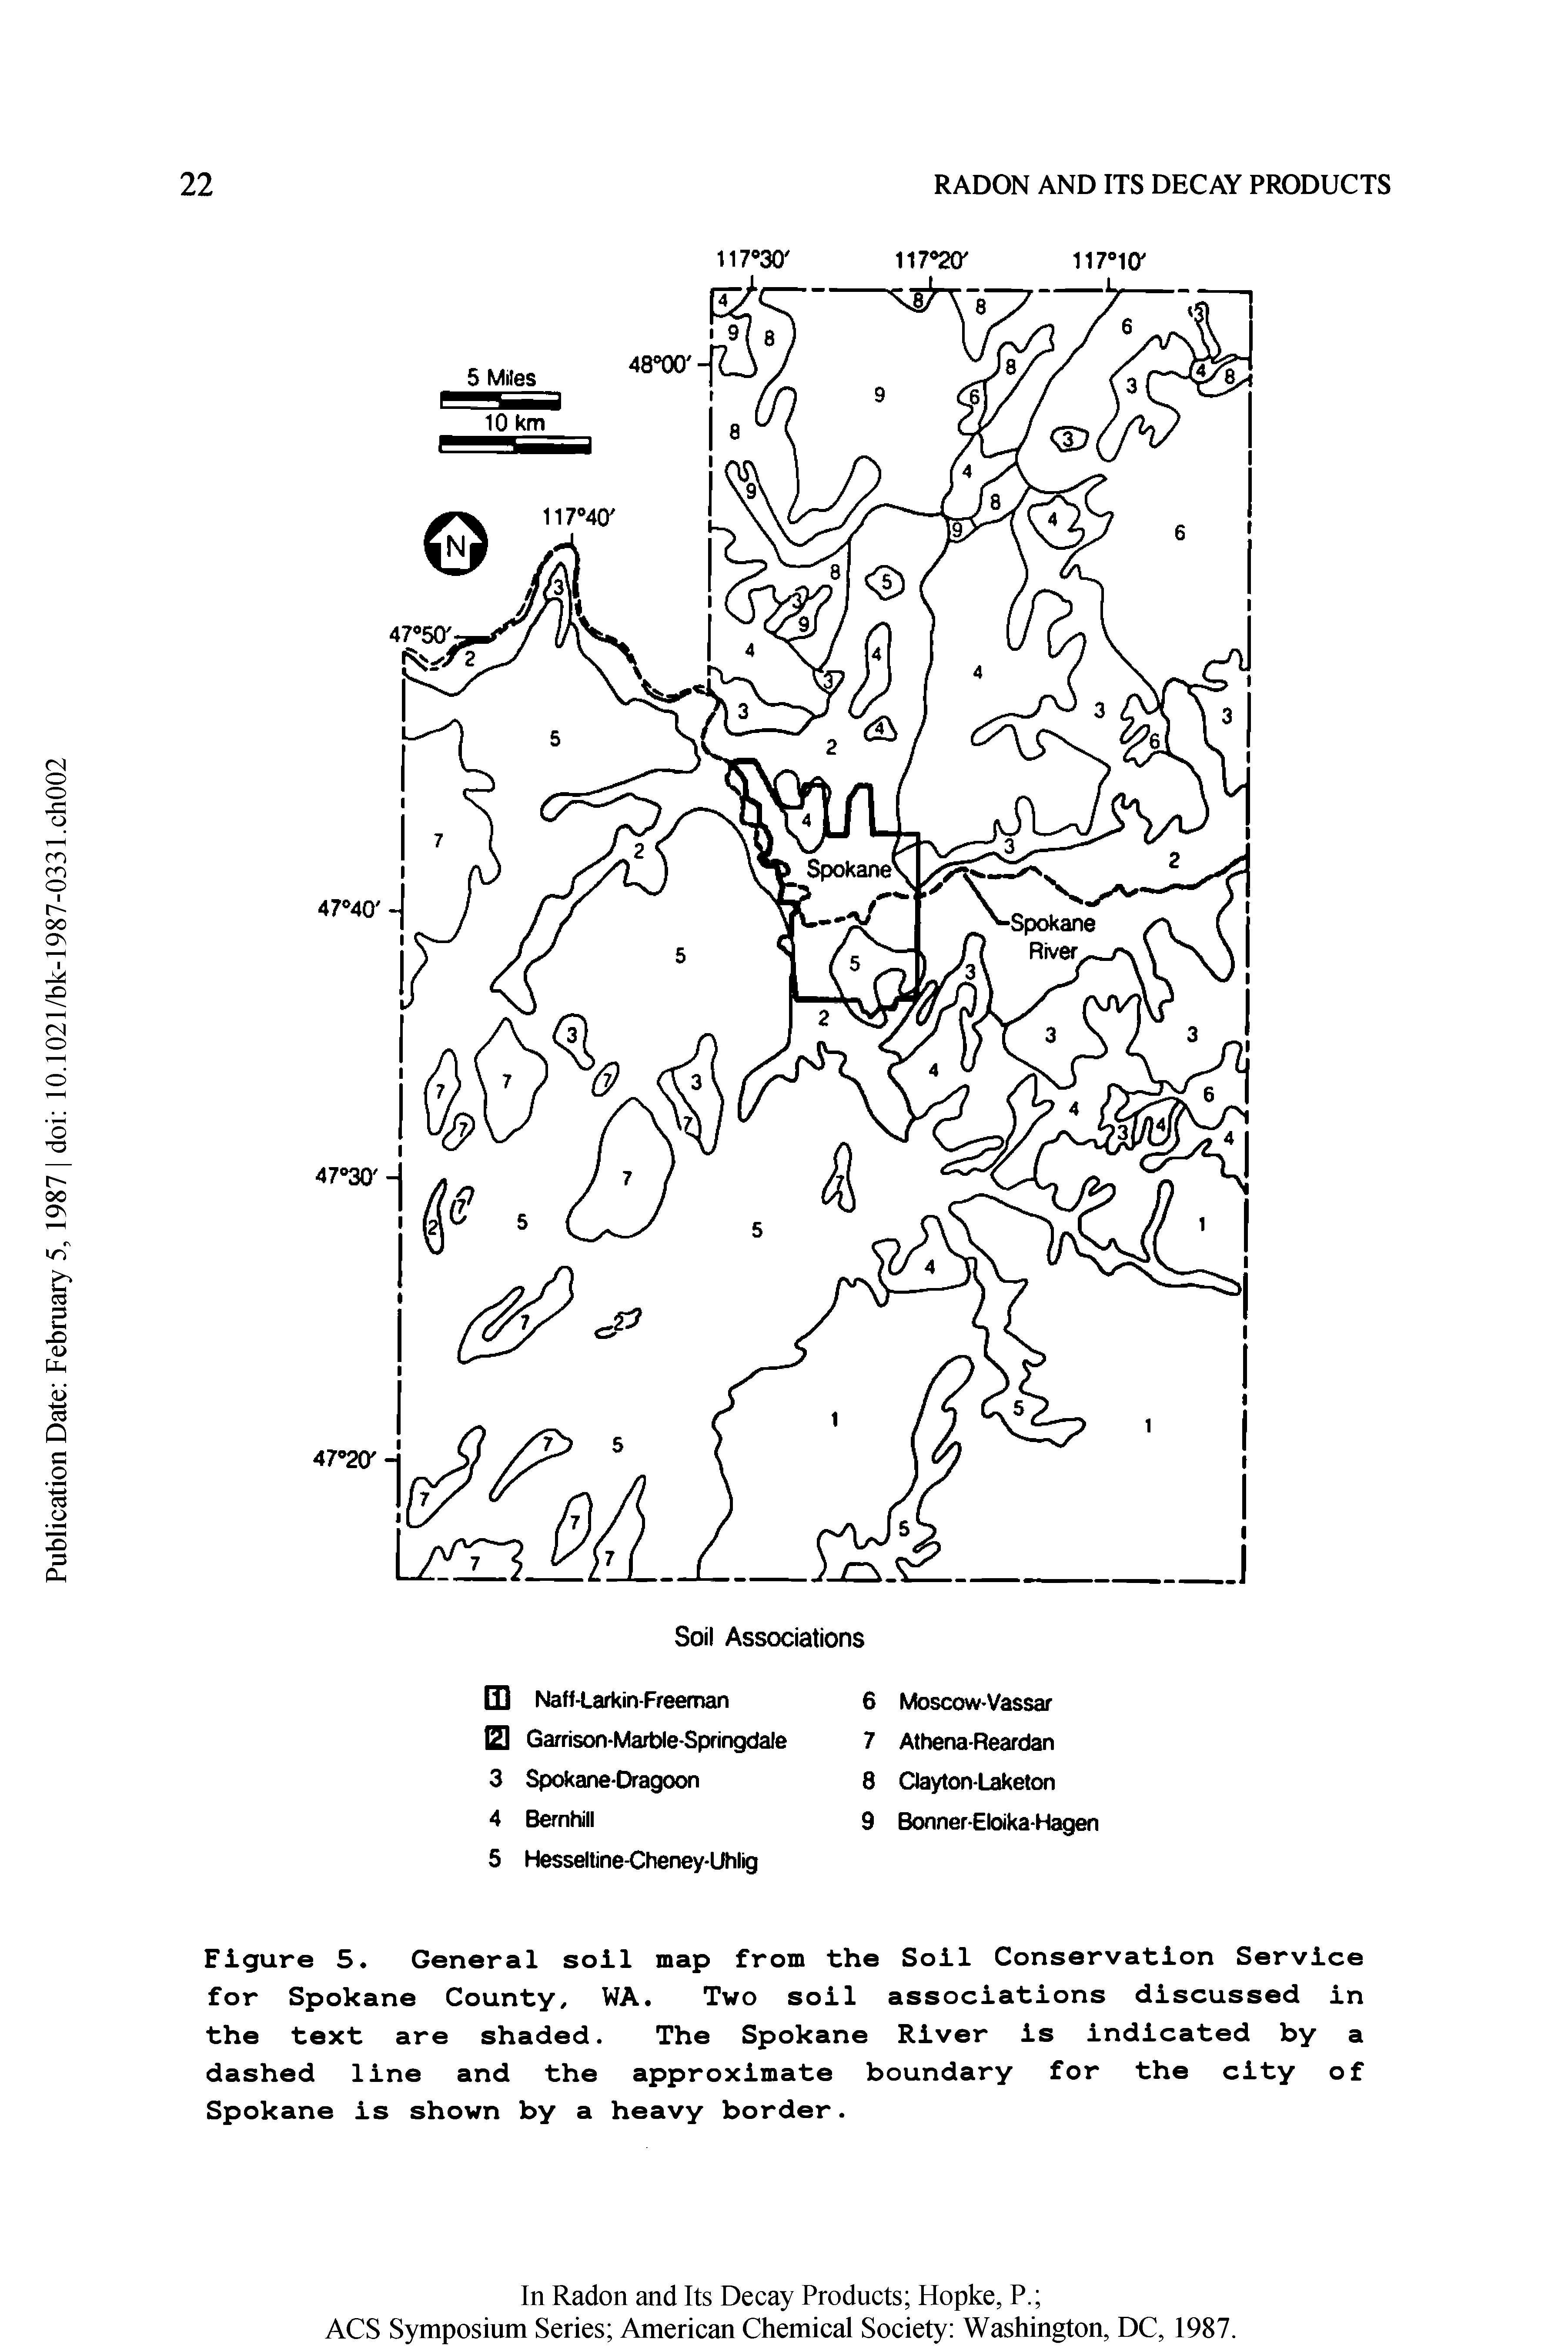 Figure 5. General soil map from the Soil Conservation Service for Spokane County, WA. Two soil associations discussed in the text are shaded. The Spokane River is indicated by a dashed line and the approximate boundary for the city of Spokane is shown by a heavy border.